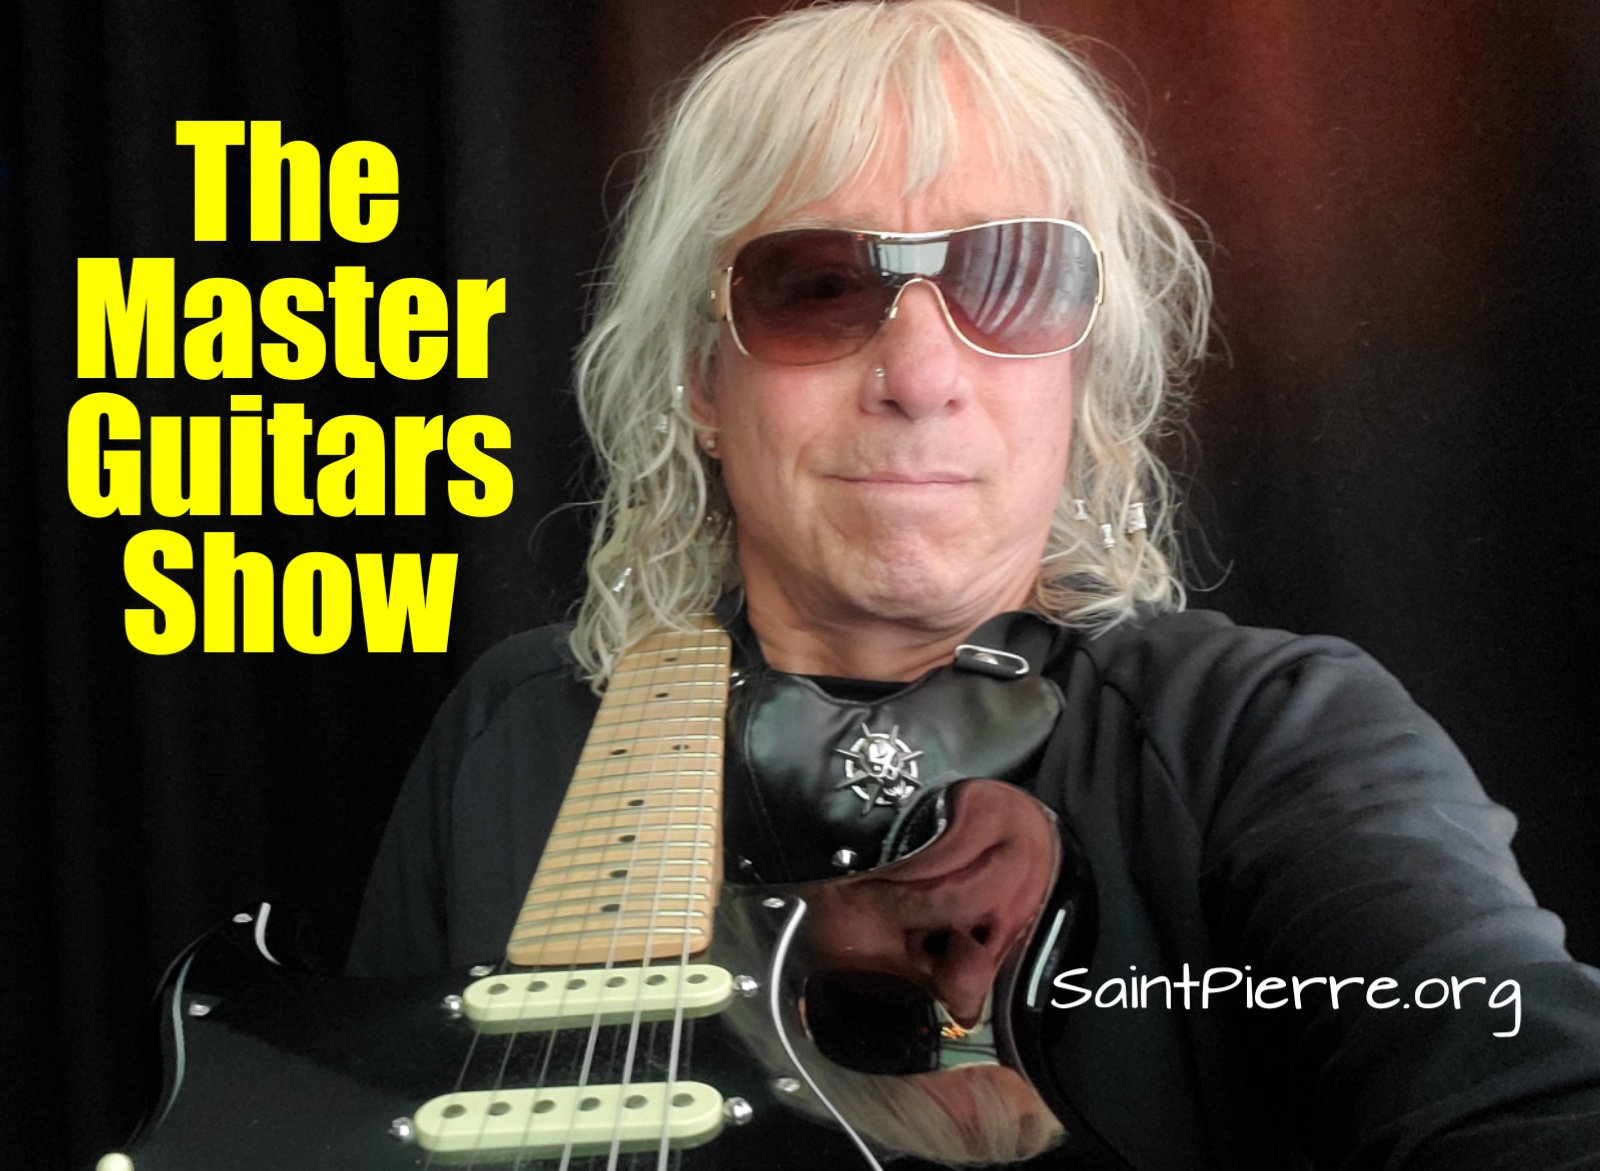 The Master Guitars Show Featuring Saint Pierre